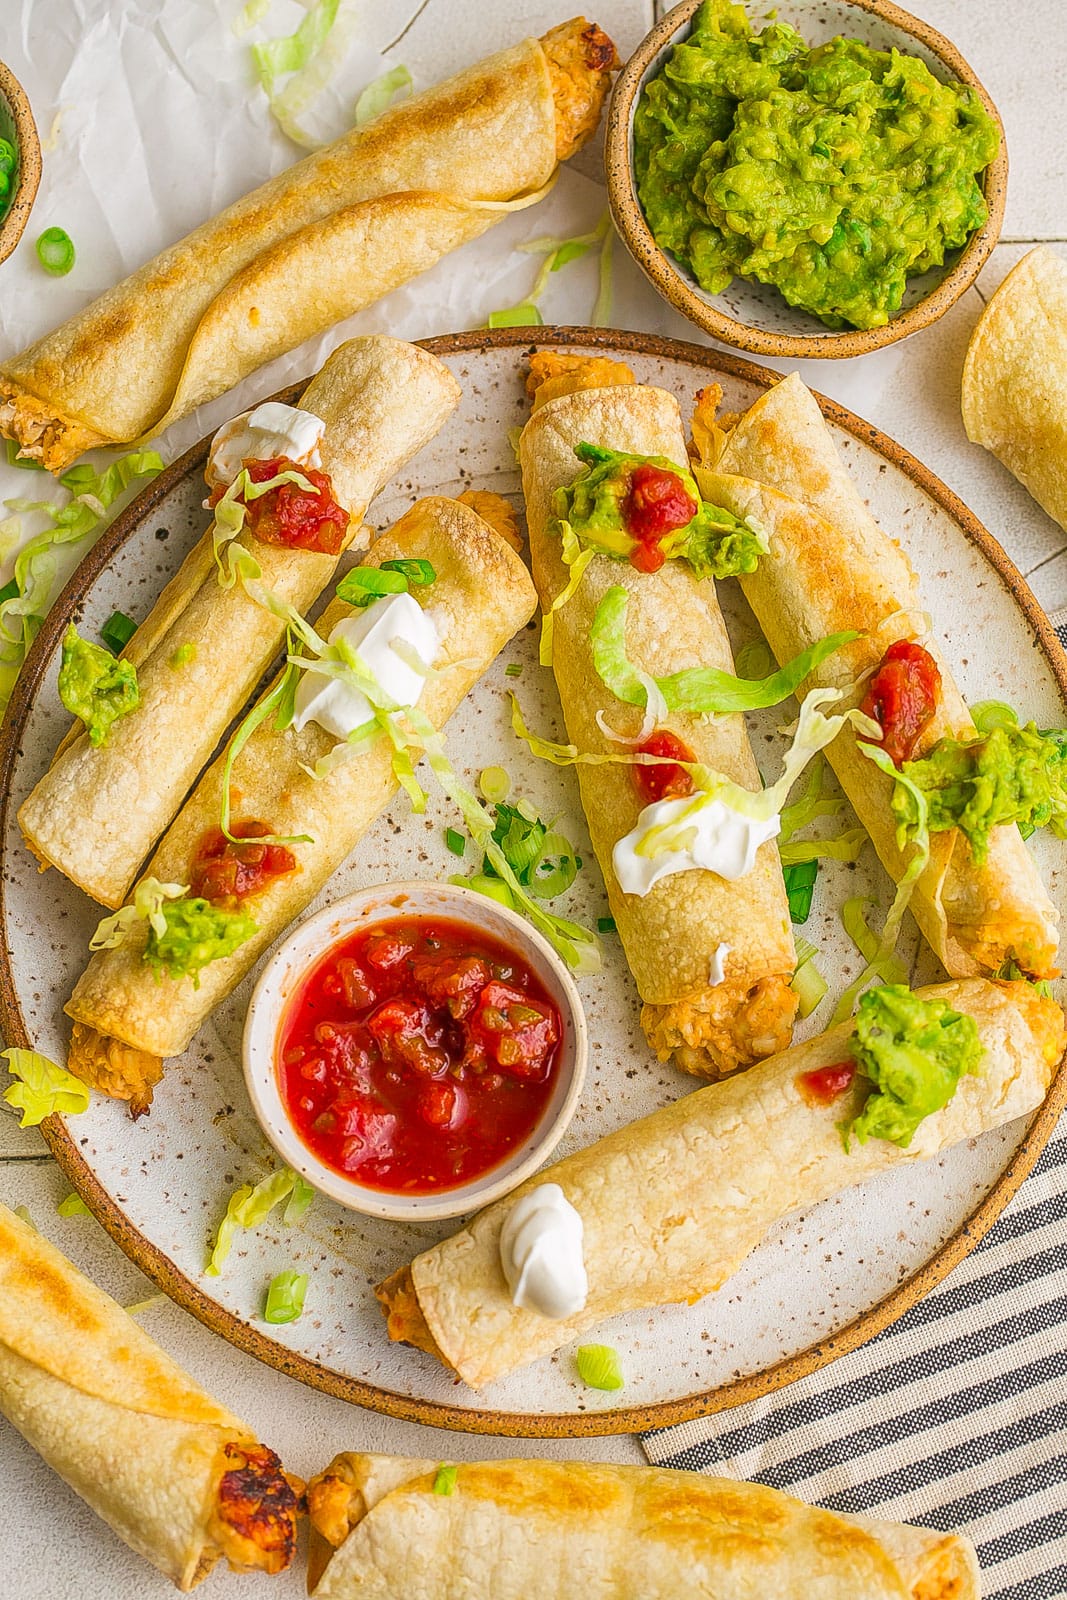 Baked Chicken and Cheese Taquitos on plate.